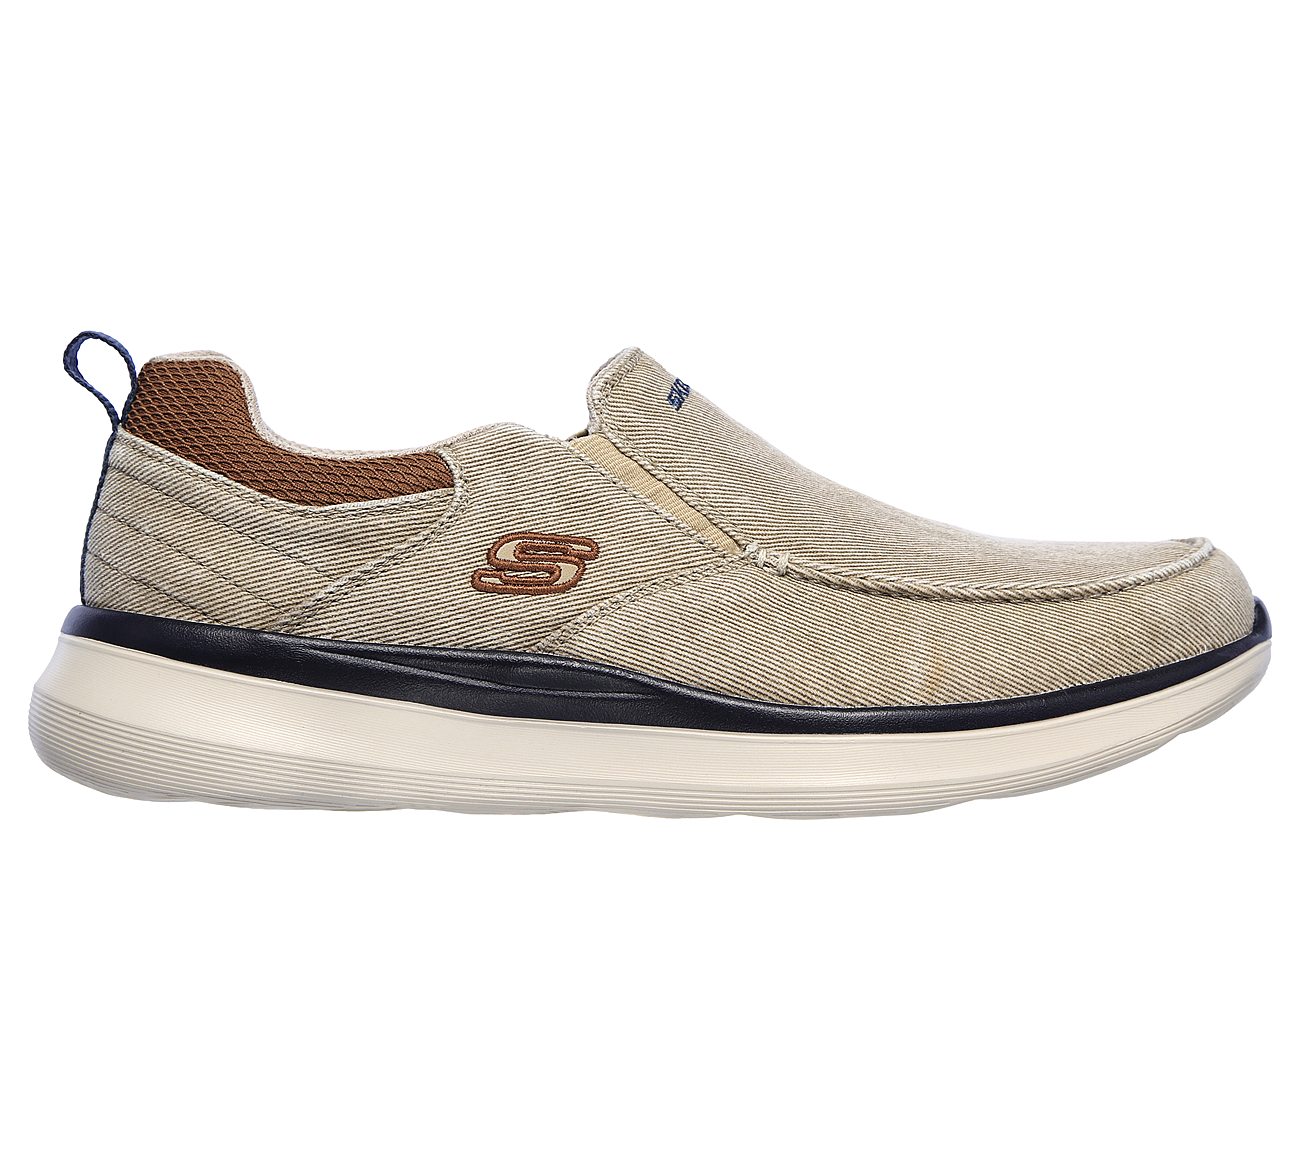 skechers shoes exeter